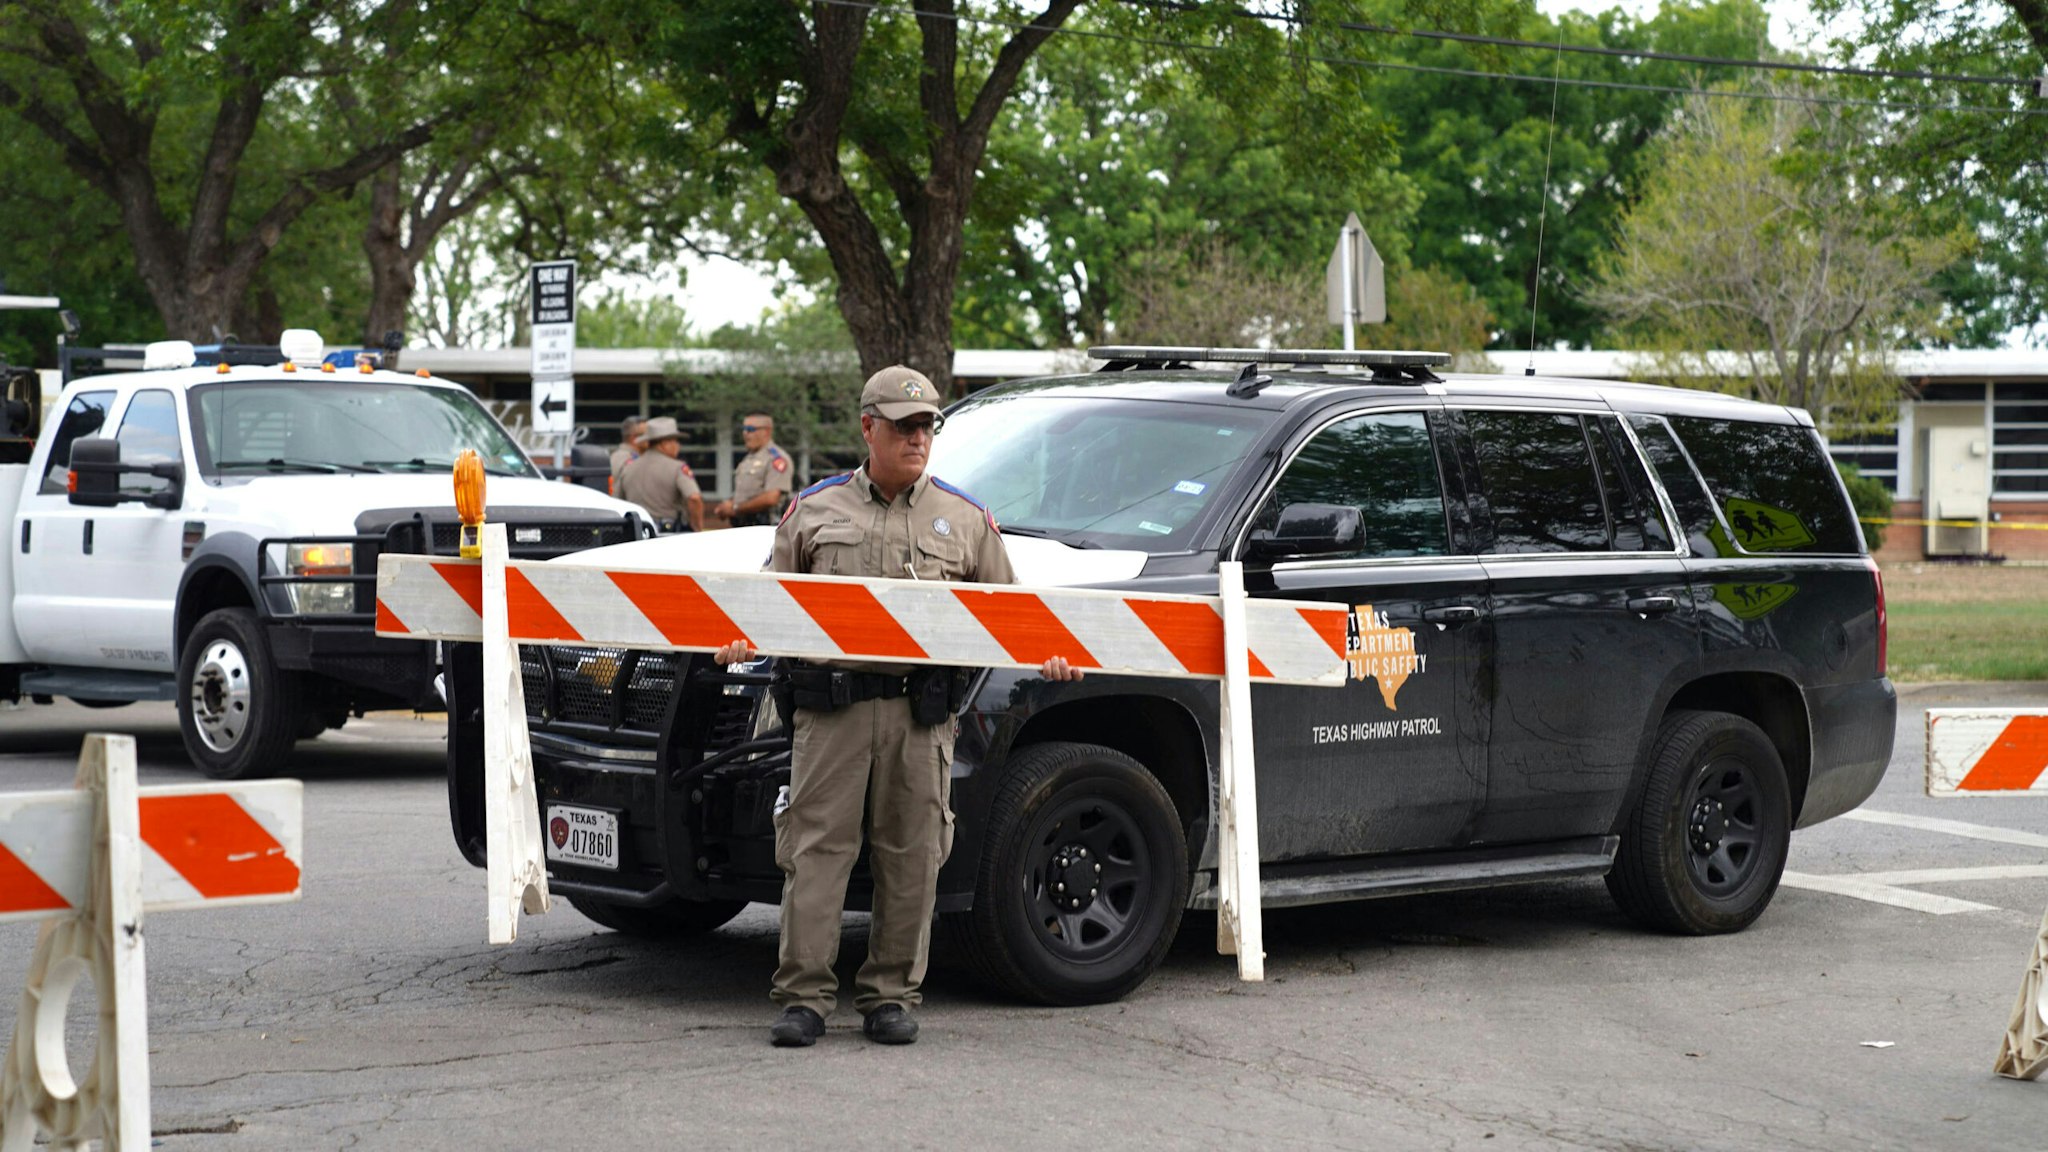 A state trooper sets up barricades outside of Robb Elementary School in Uvalde, Texas, on May 24, 2022. - An 18-year-old gunman killed 14 children and a teacher at an elementary school in Texas on Tuesday, according to the state's governor, in the nation's deadliest school shooting in years.